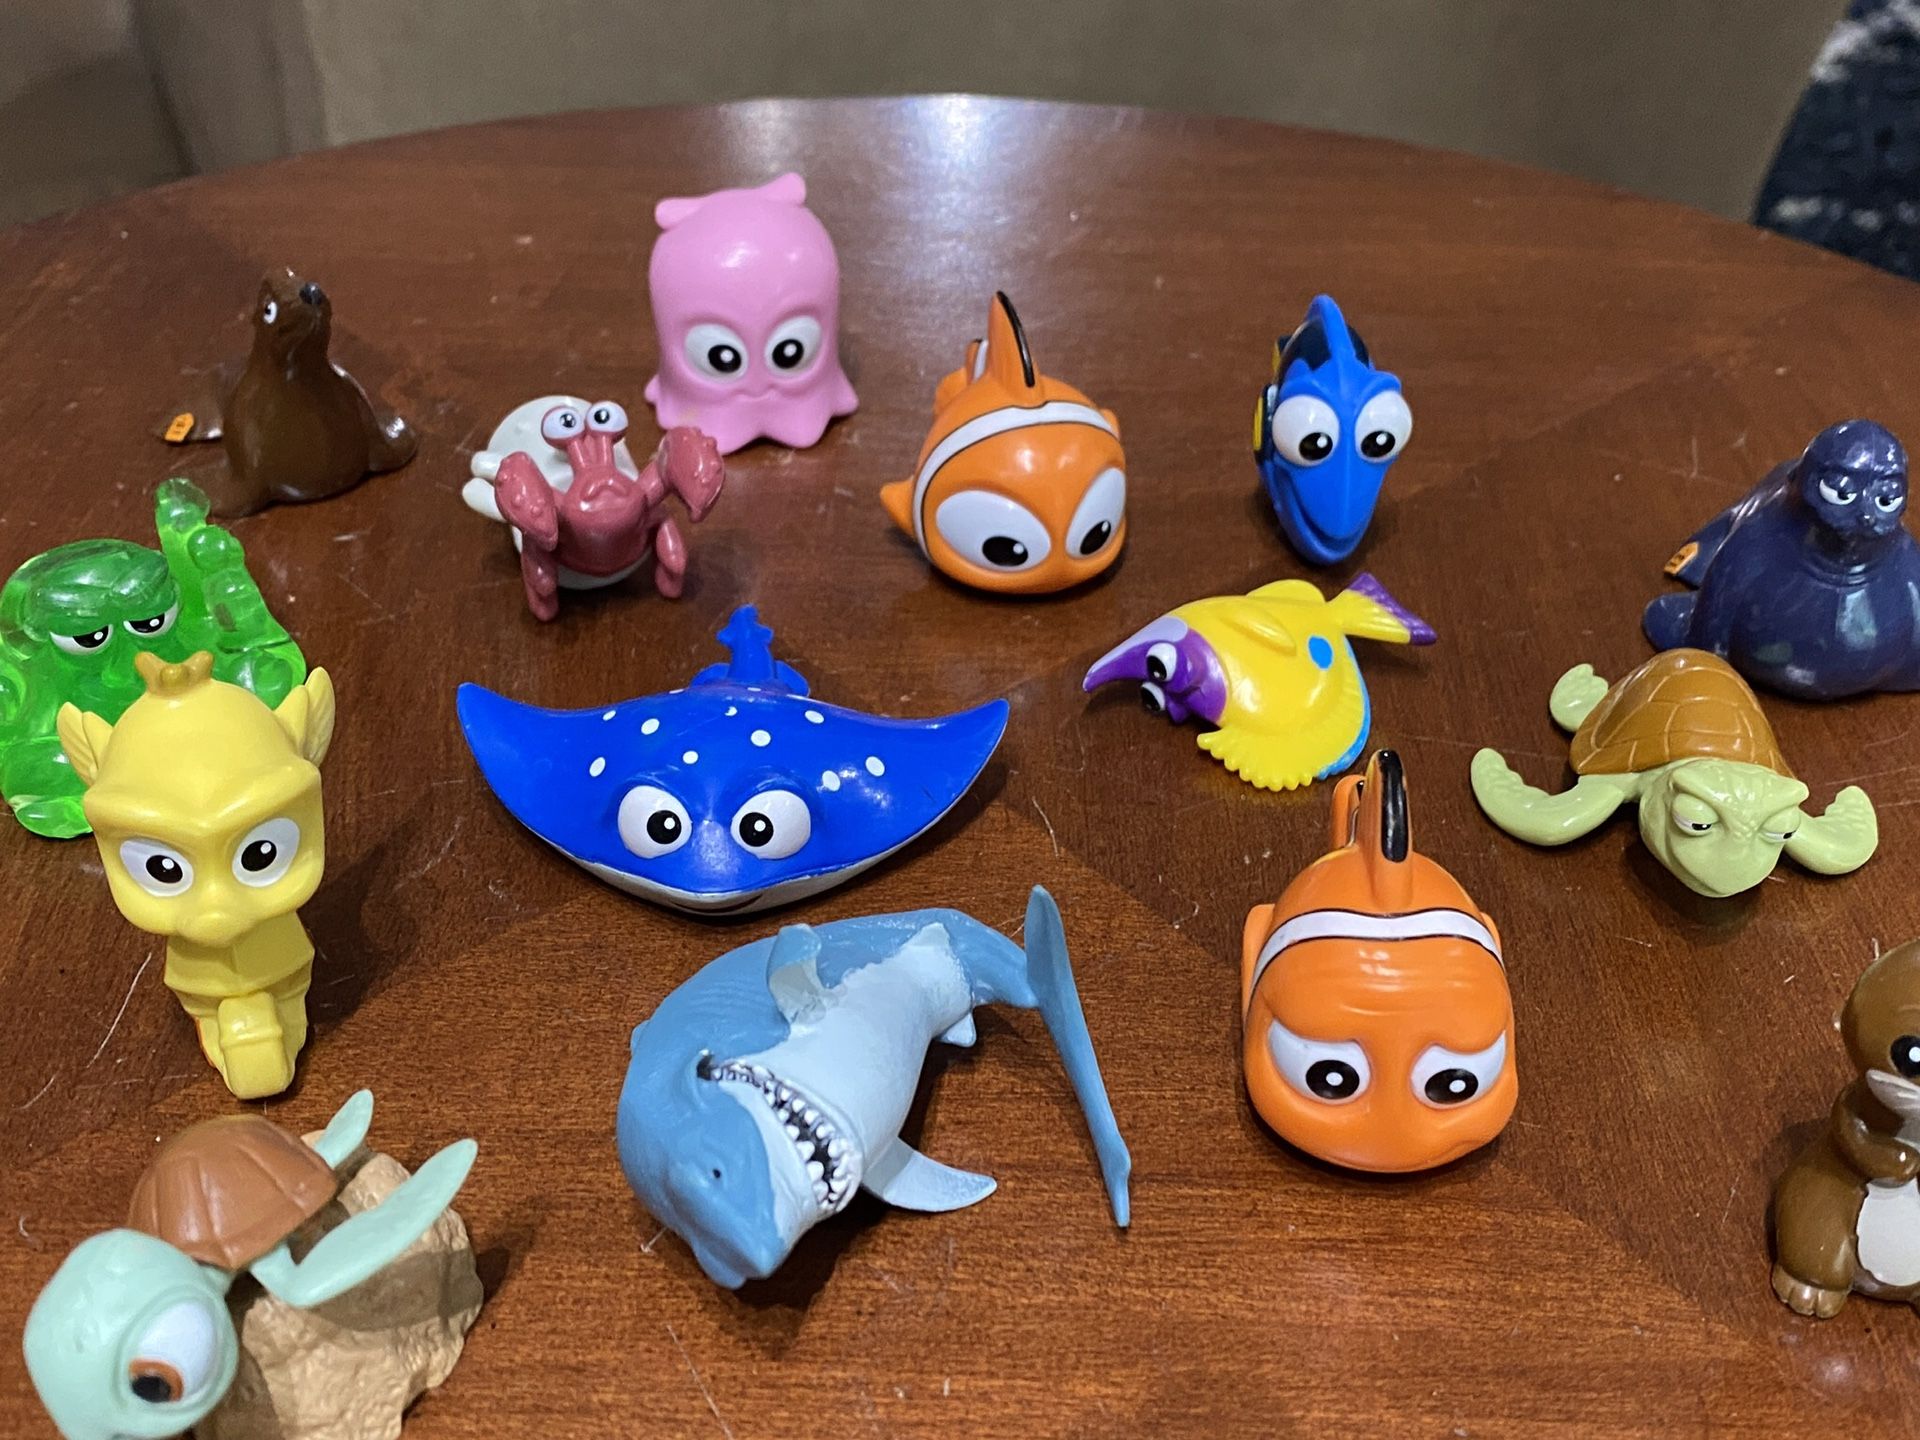 Nemo children’s bath toys, 16 characters. $8 for all.